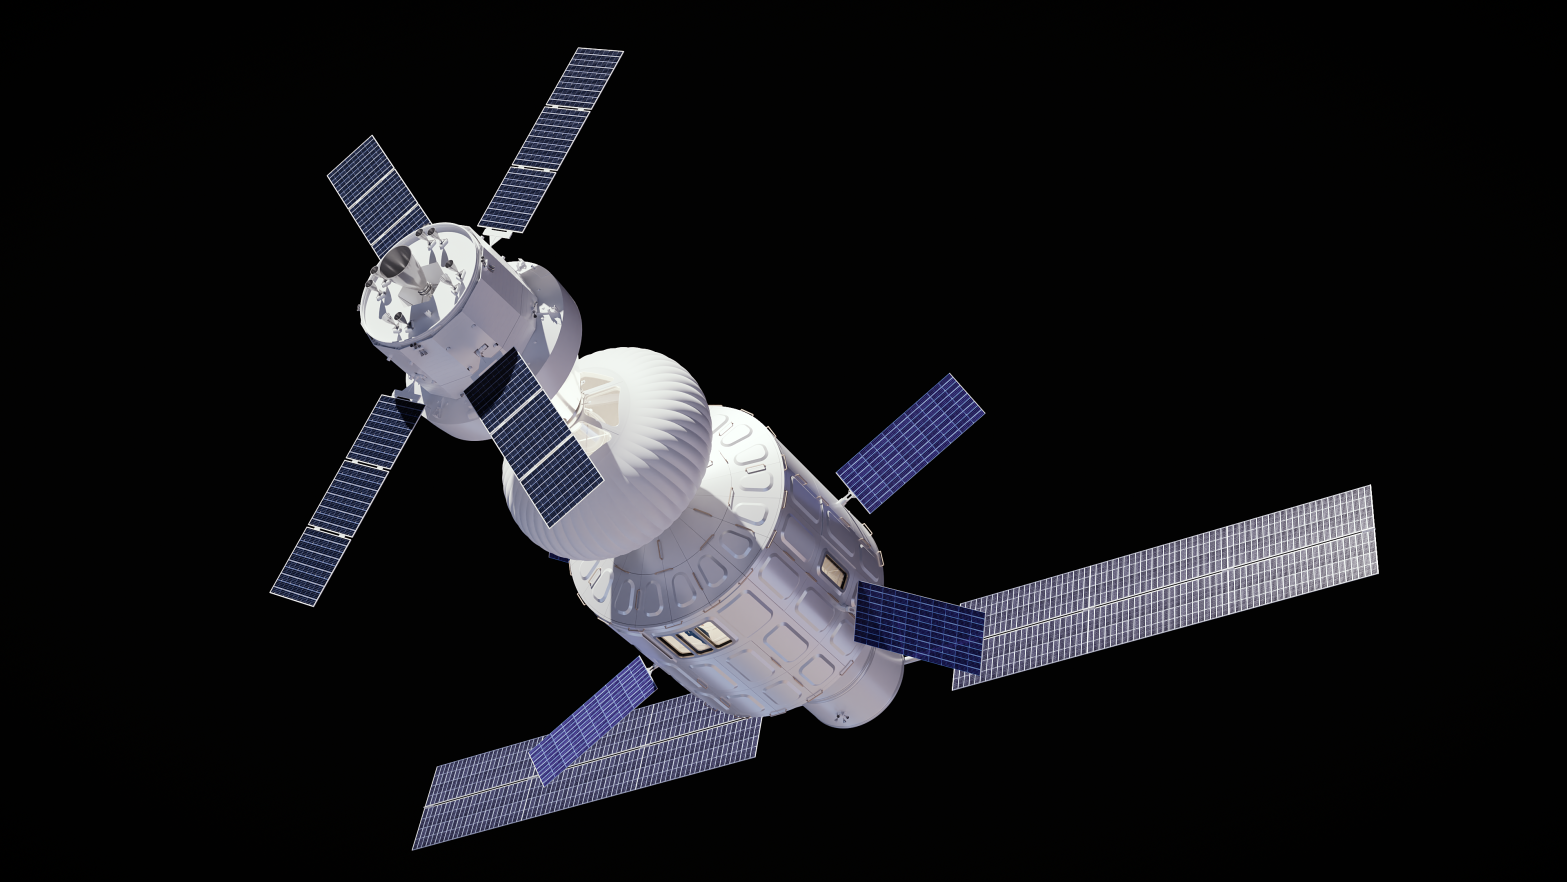 The orbital module is designed to fit inside next-generation heavy-lift rockets like SpaceX's Starship. (Illustration: Airbus)